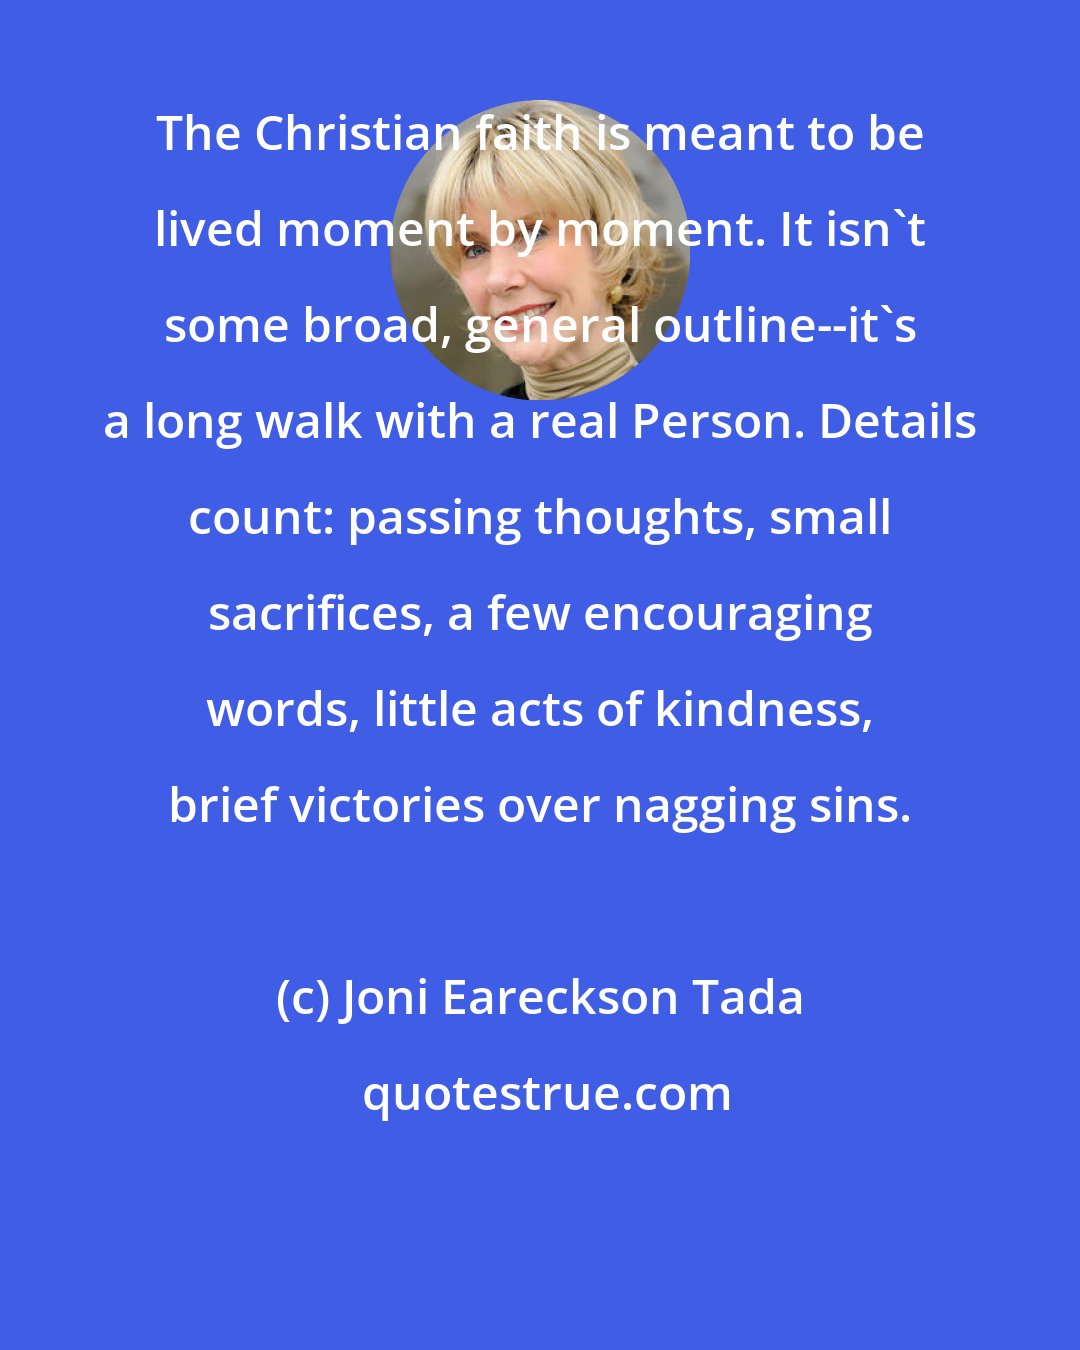 Joni Eareckson Tada: The Christian faith is meant to be lived moment by moment. It isn't some broad, general outline--it's a long walk with a real Person. Details count: passing thoughts, small sacrifices, a few encouraging words, little acts of kindness, brief victories over nagging sins.